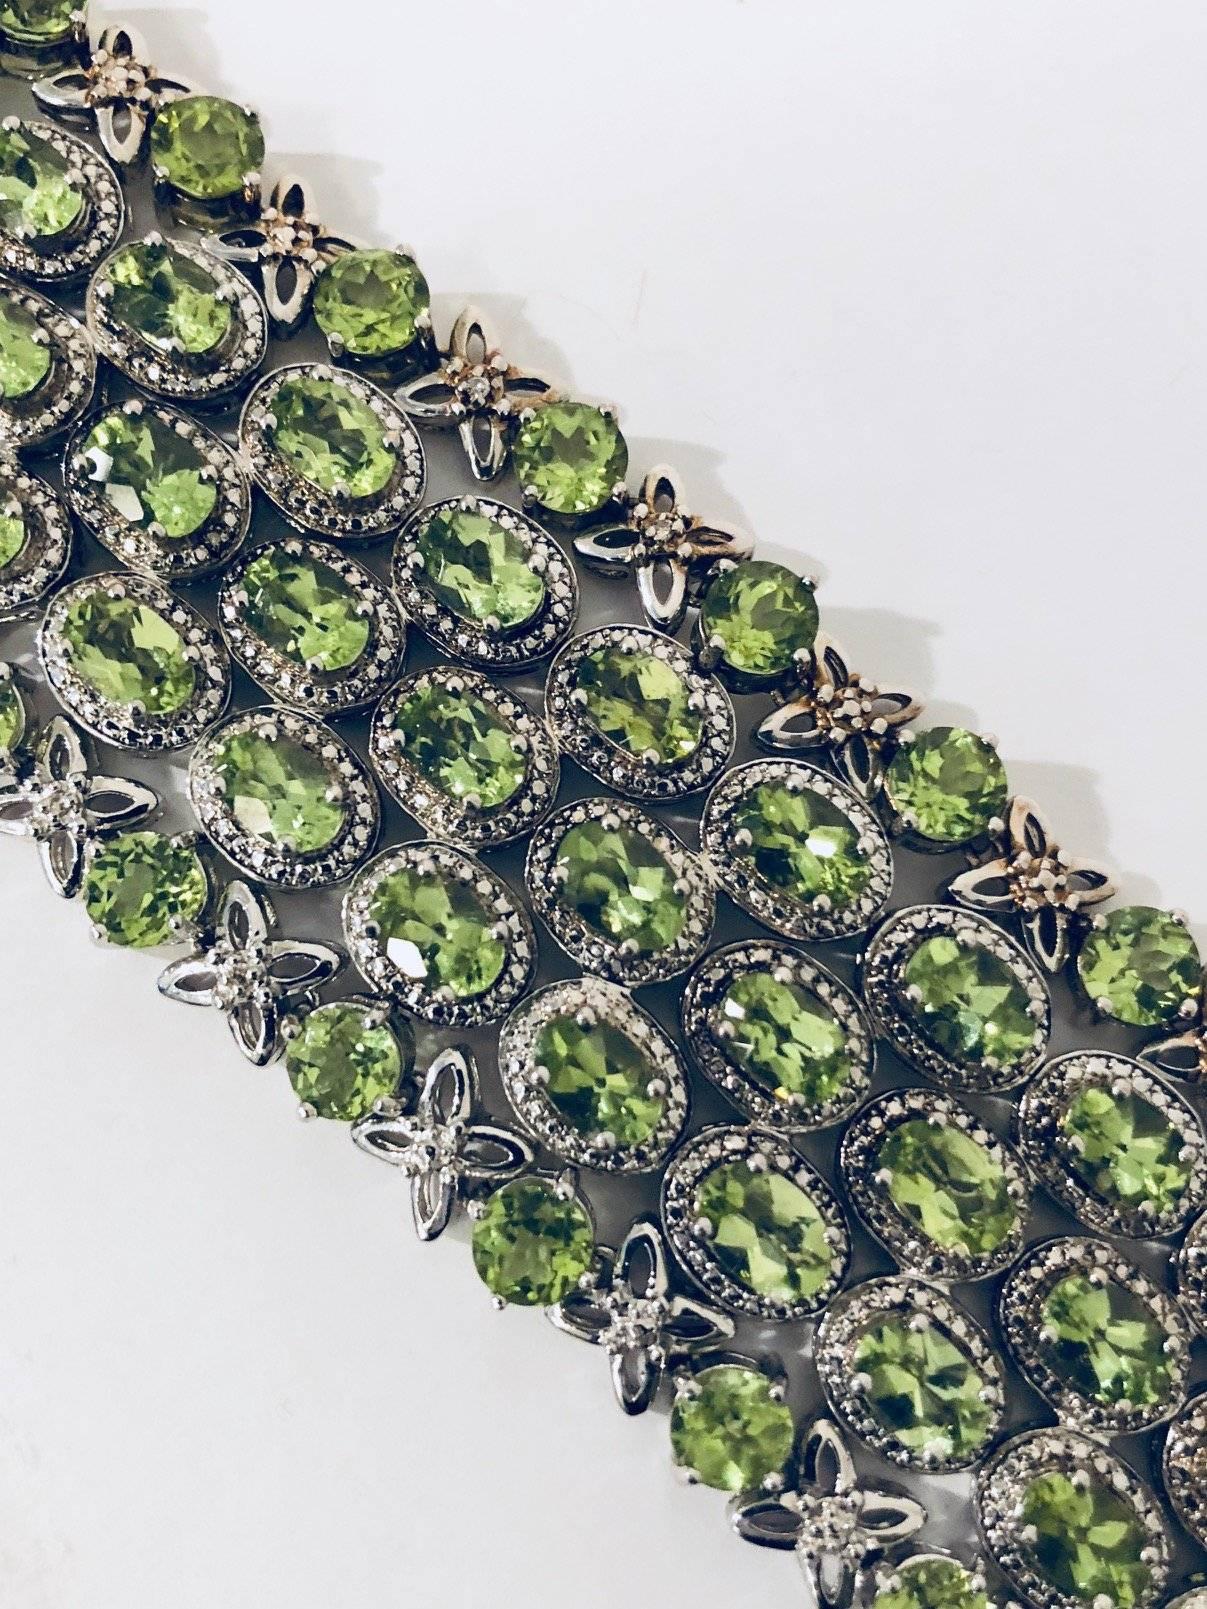 Fabricated in sterling silver, this is a one of a kind peridot and diamond bracelet!  It began with three rows of oval, faceted, beautifully matched peridots in diamond wreaths.  Two additional bracelets were purchased and soldered on to the